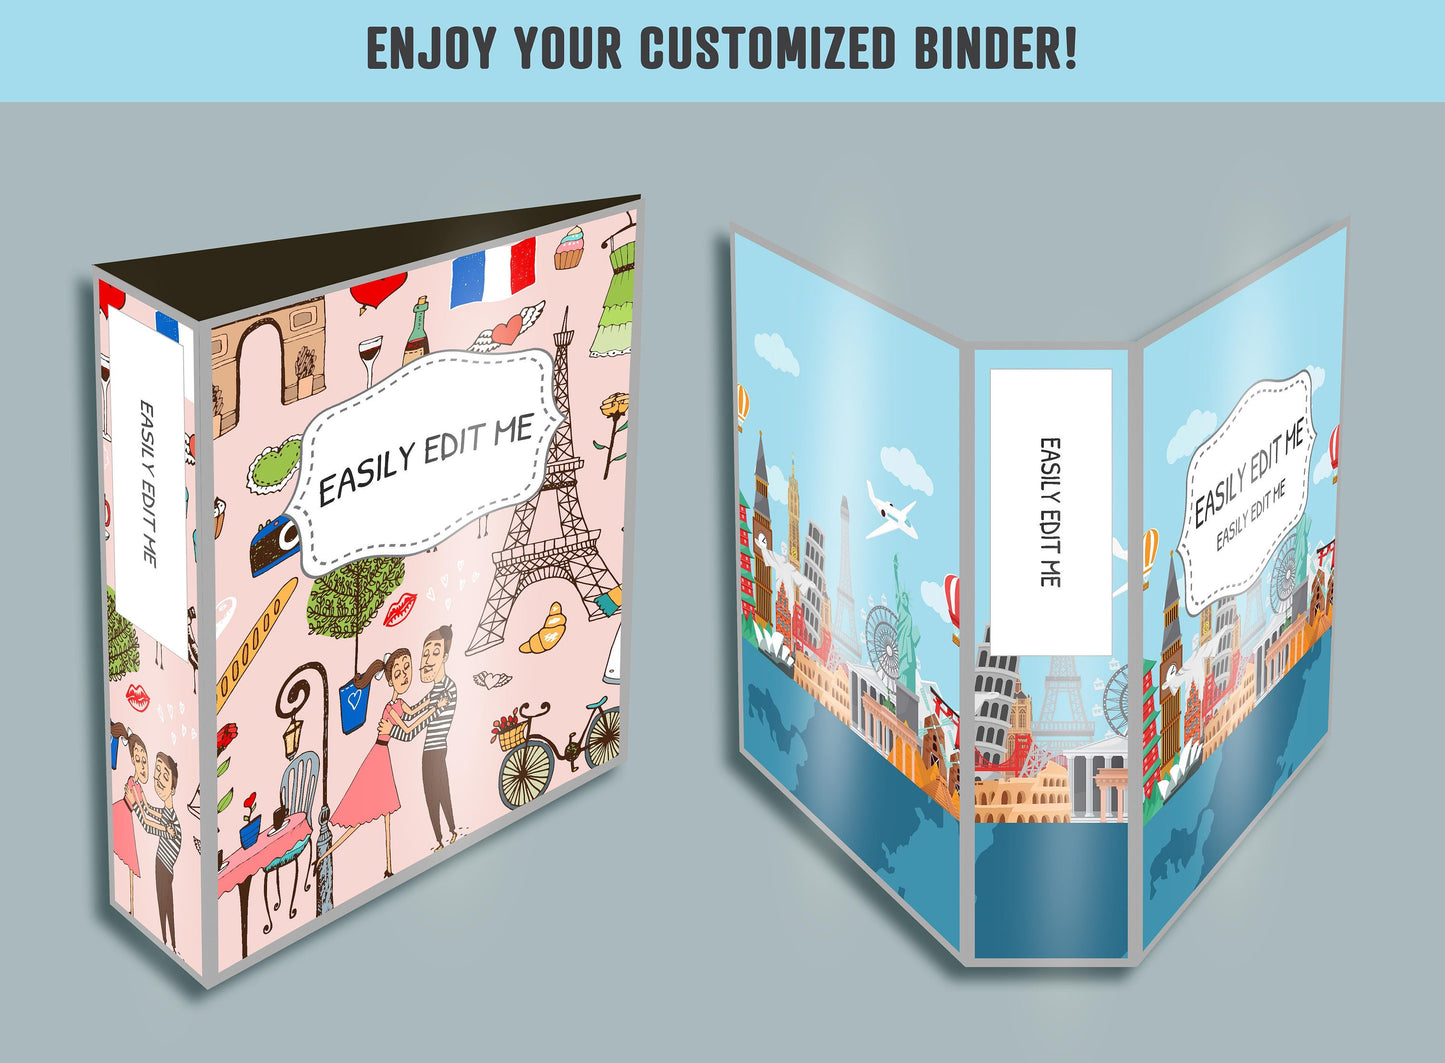 Travel To World, Cultural Travel Binder Cover, 10 Printable & Editable Binder Covers+Spines, Binder Inserts, Teacher/School Planner Template